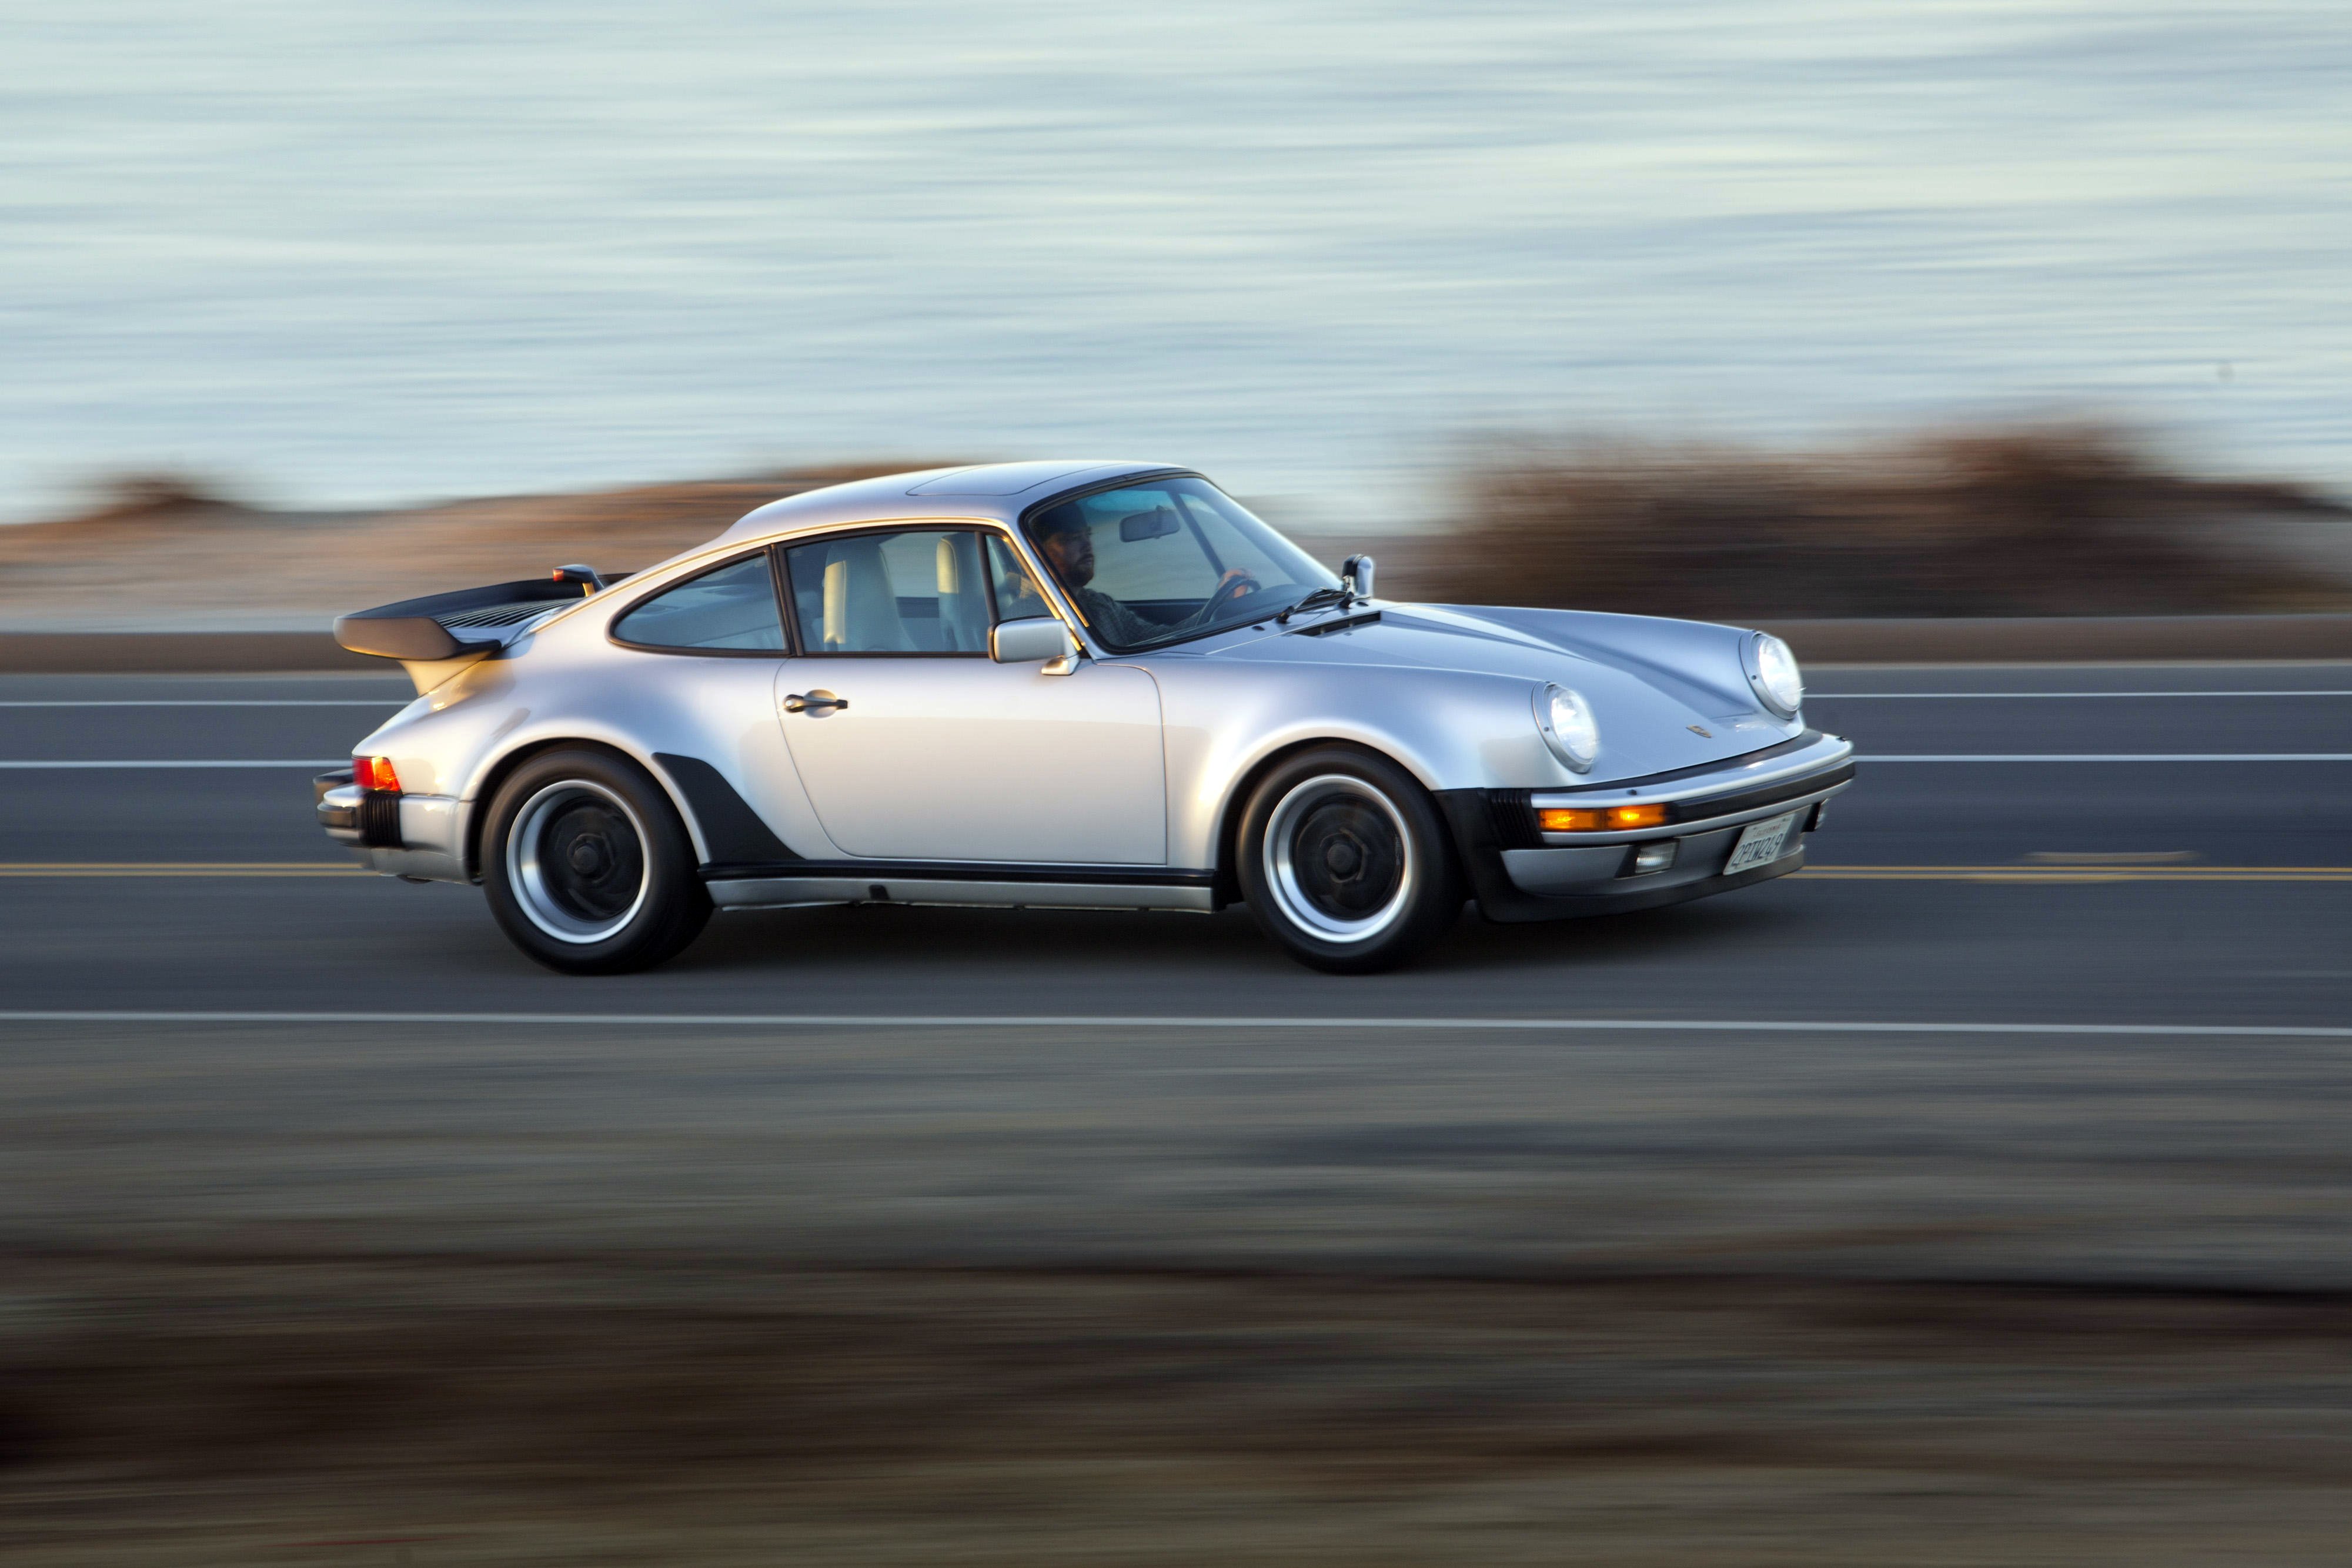 Porsche 930 Wallpapers High Resolution and Quality Download